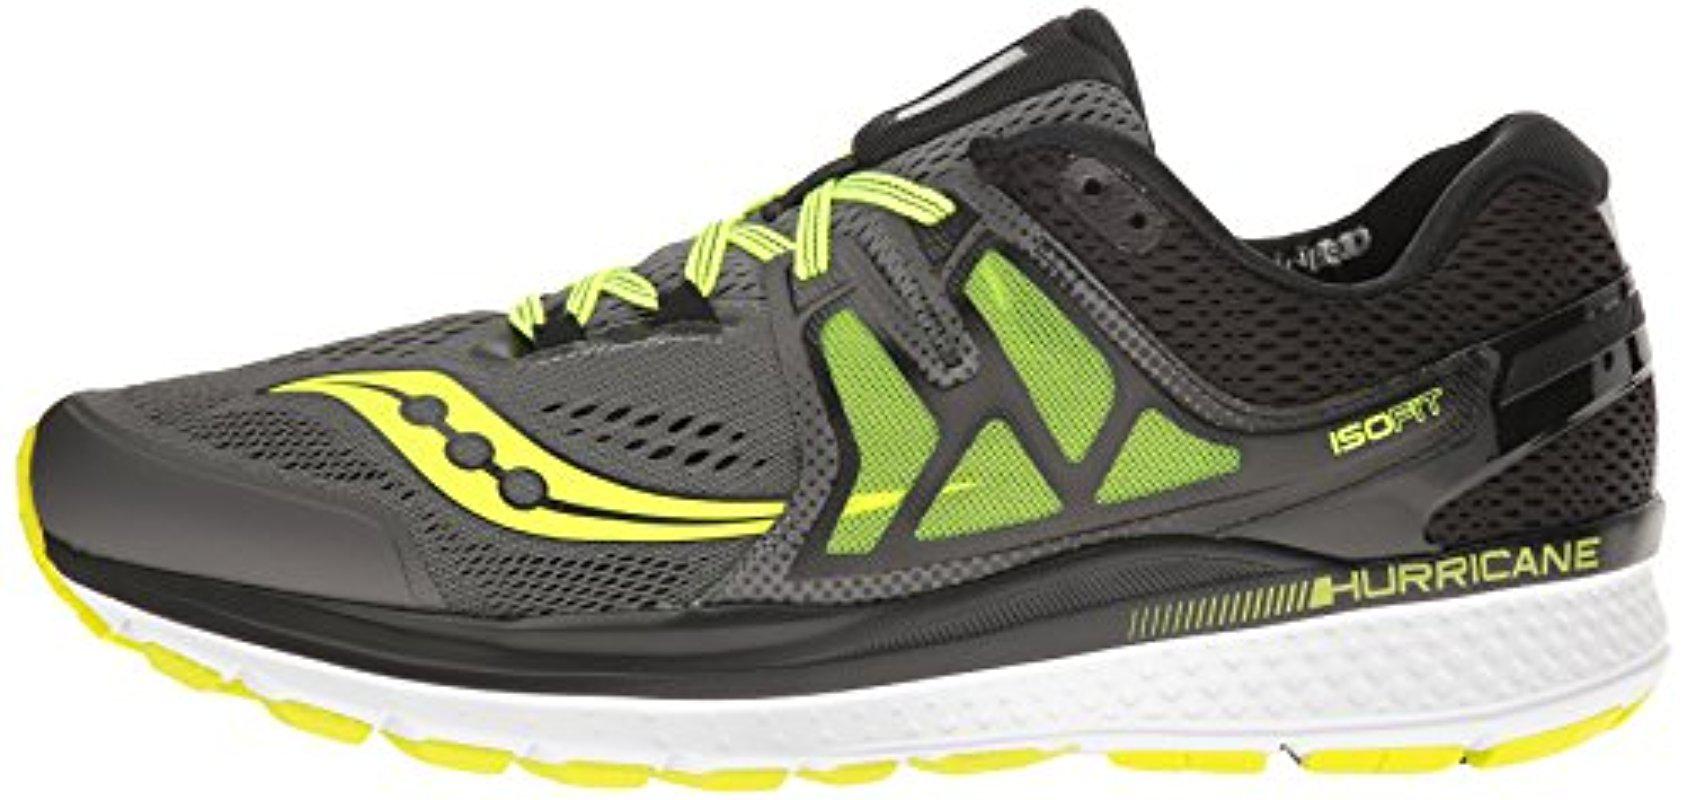 Saucony Synthetic Hurricane Iso 3 Running Shoe for Men - Save 39 